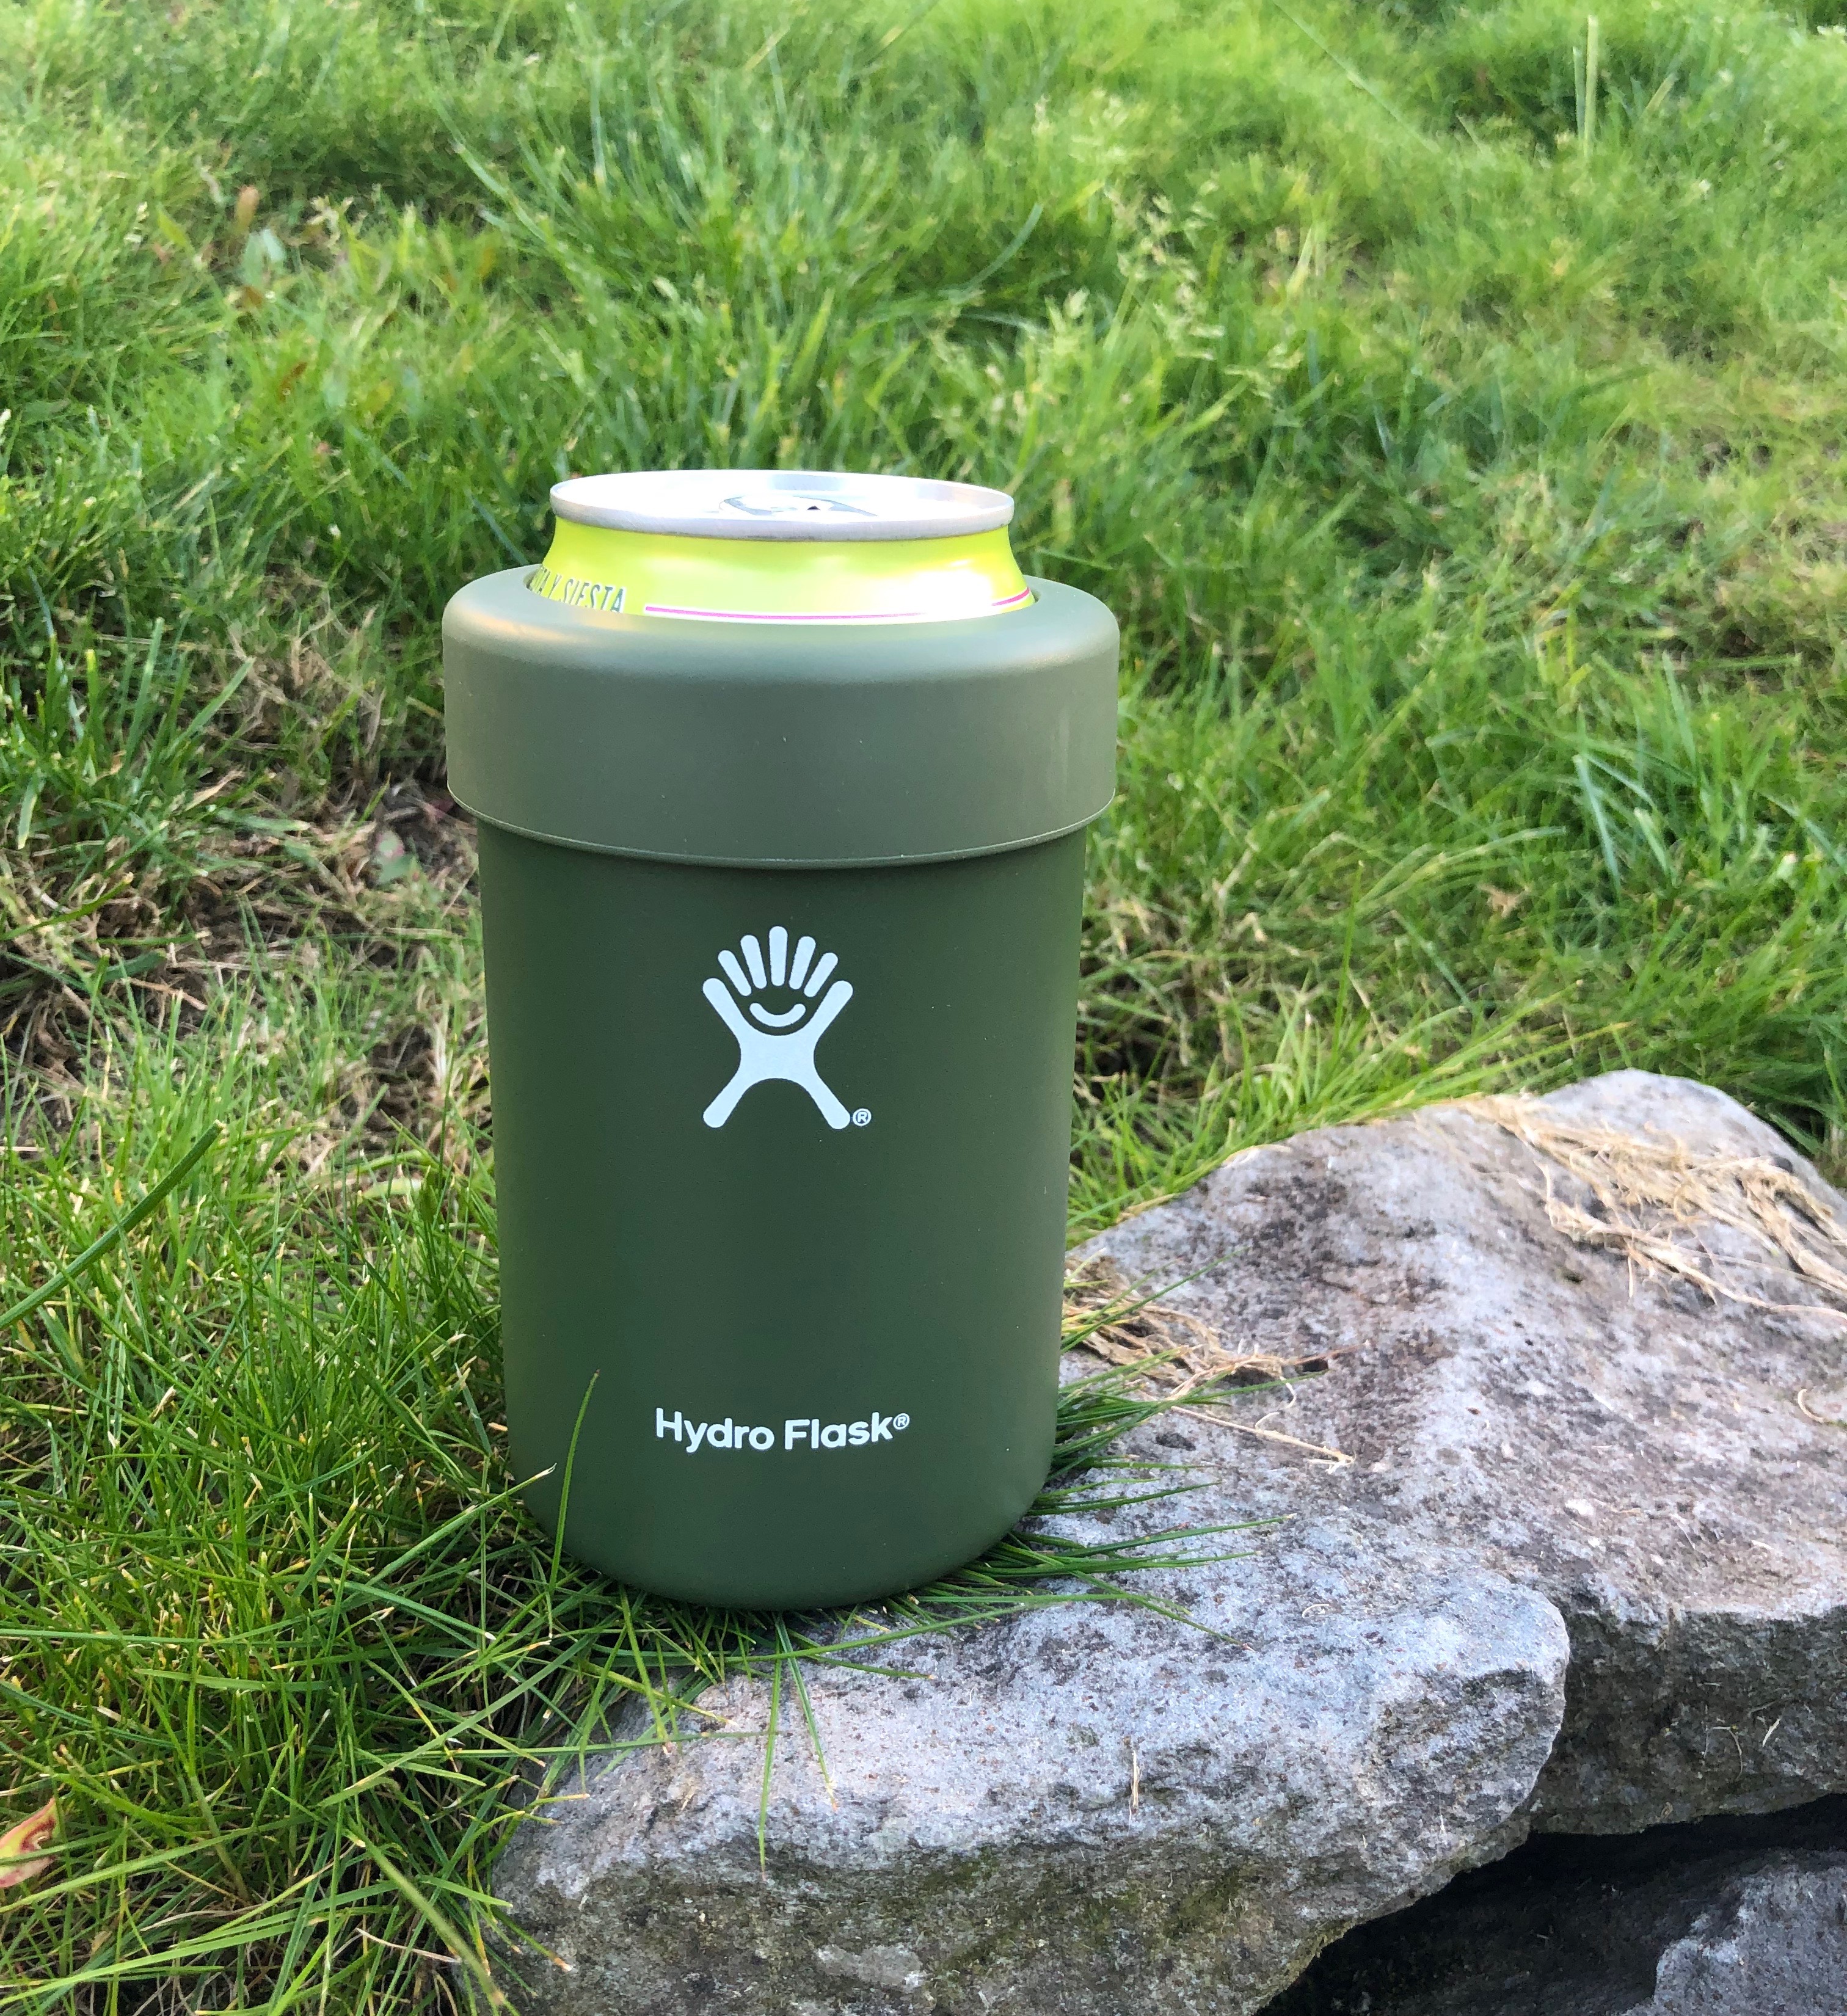 https://brewpublic.com/wp-content/uploads/2019/04/The-new-HydroFlask-Beer-Cooler-Cup-is-a-great-way-to-keep-your-beer-can-or-bottle-a-bit-cooler-for-an-extended-period-of-time..jpeg